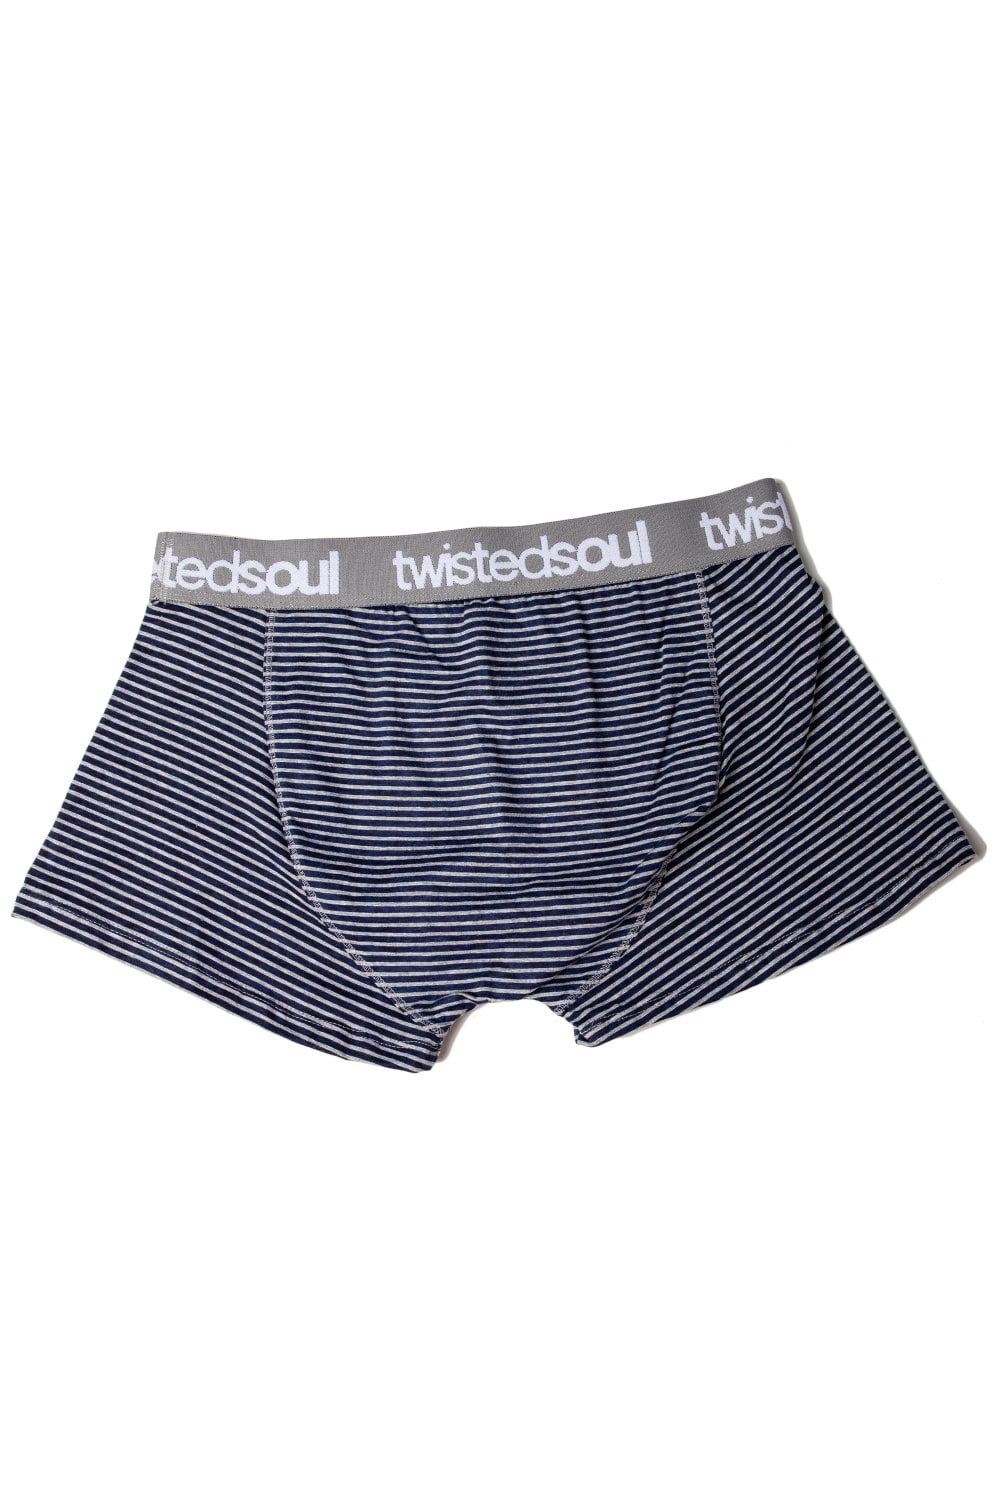 3 Pack Of Boxers - Twisted Soul | Men's Clothing